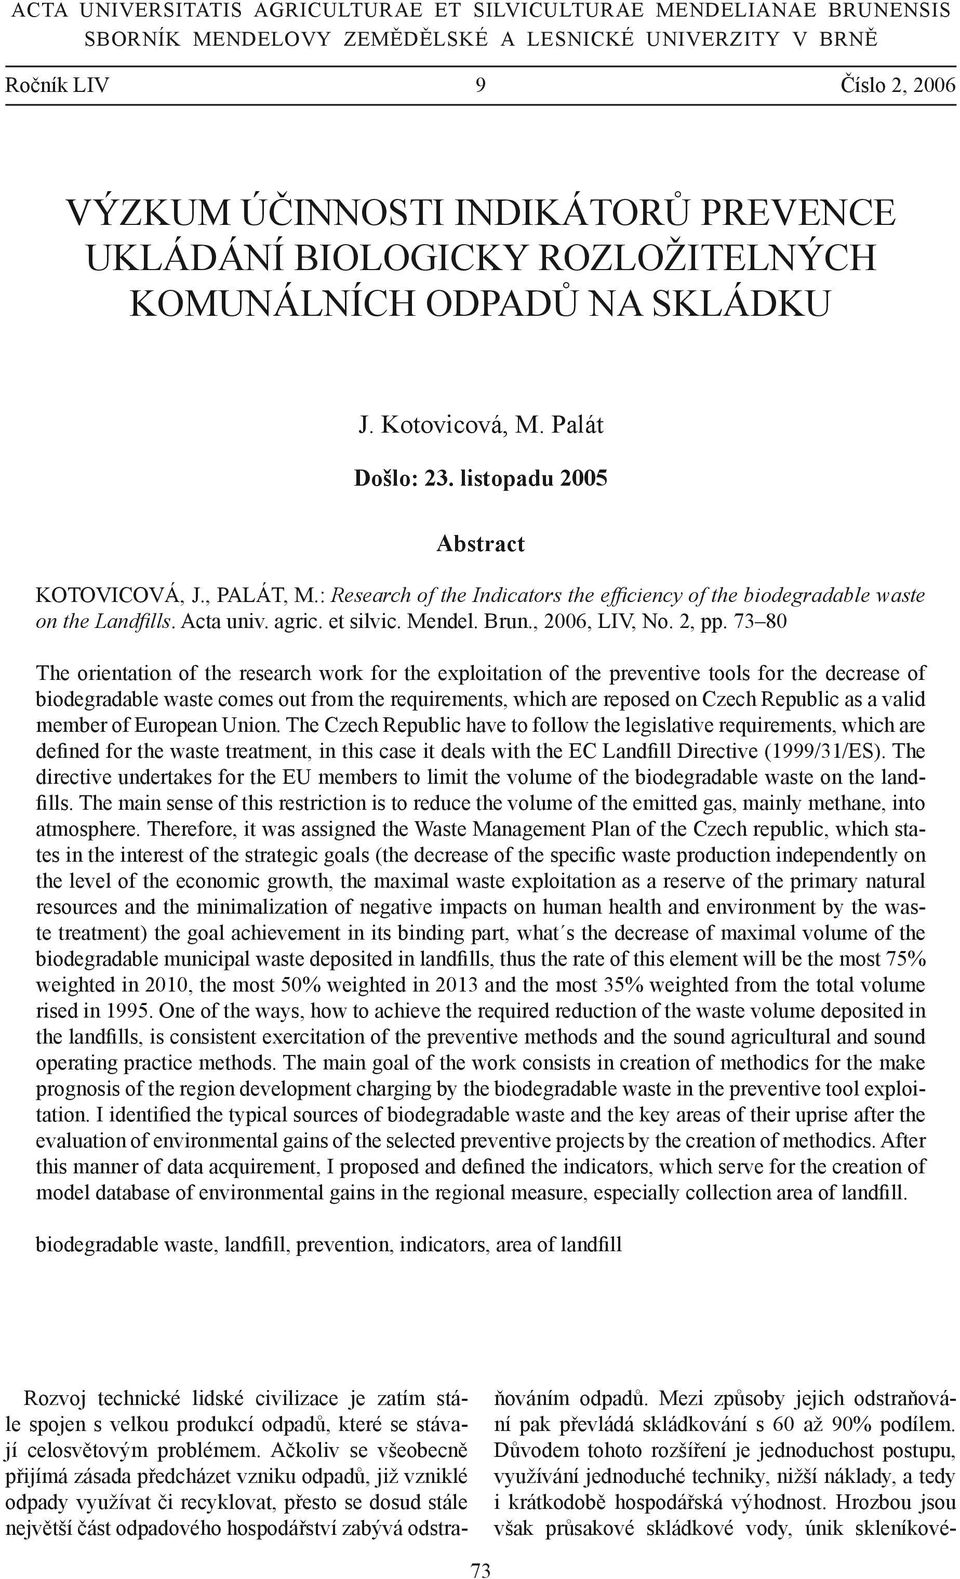 : Research of the Indicators the efficiency of the biodegradable waste on the Landfills. Acta univ. agric. et silvic. Mendel. Brun., 2006, LIV, No. 2, pp.